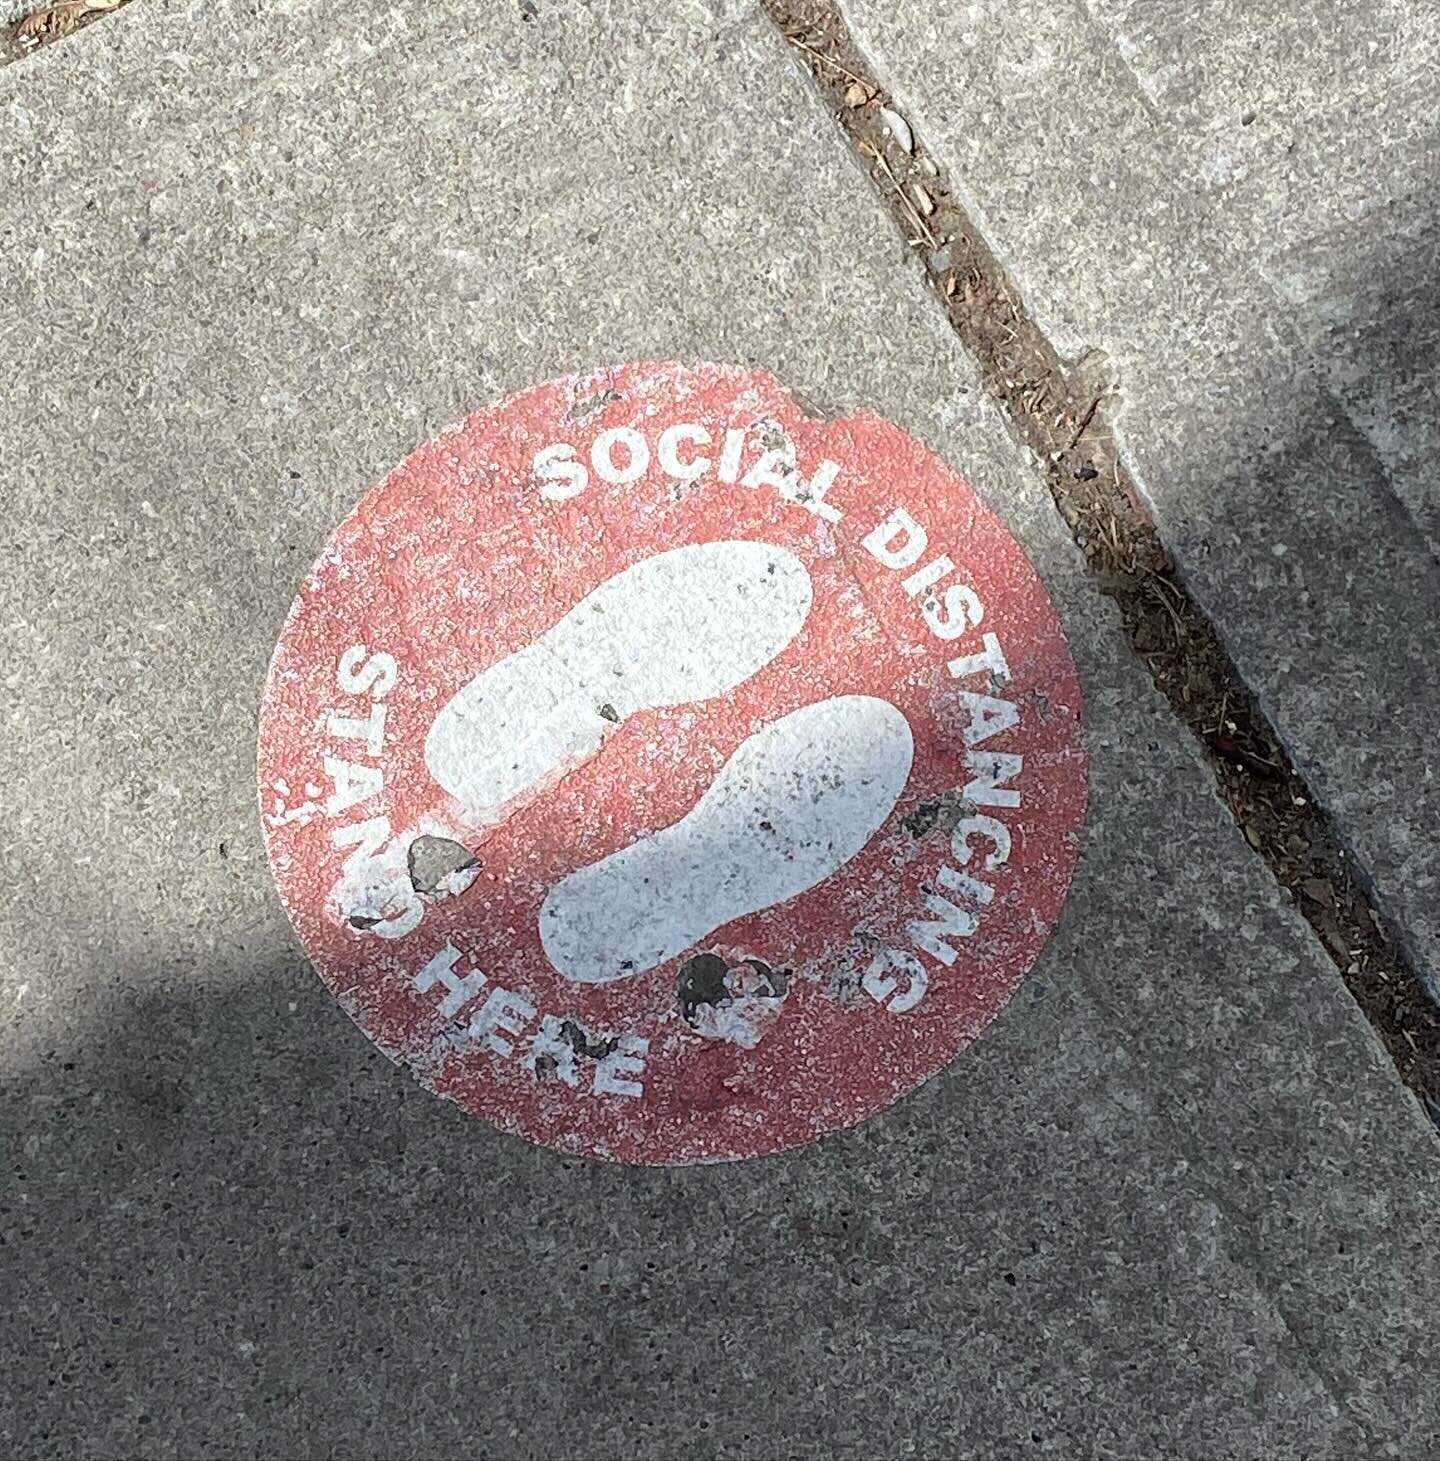 I saw these spread out on the sidewalk near where I am staying this week. No one pays attention to them anymore. 

They are fading away and almost seem absurd. 
Still, they remain for now as a good reminder that things are not permanent. 

This too s